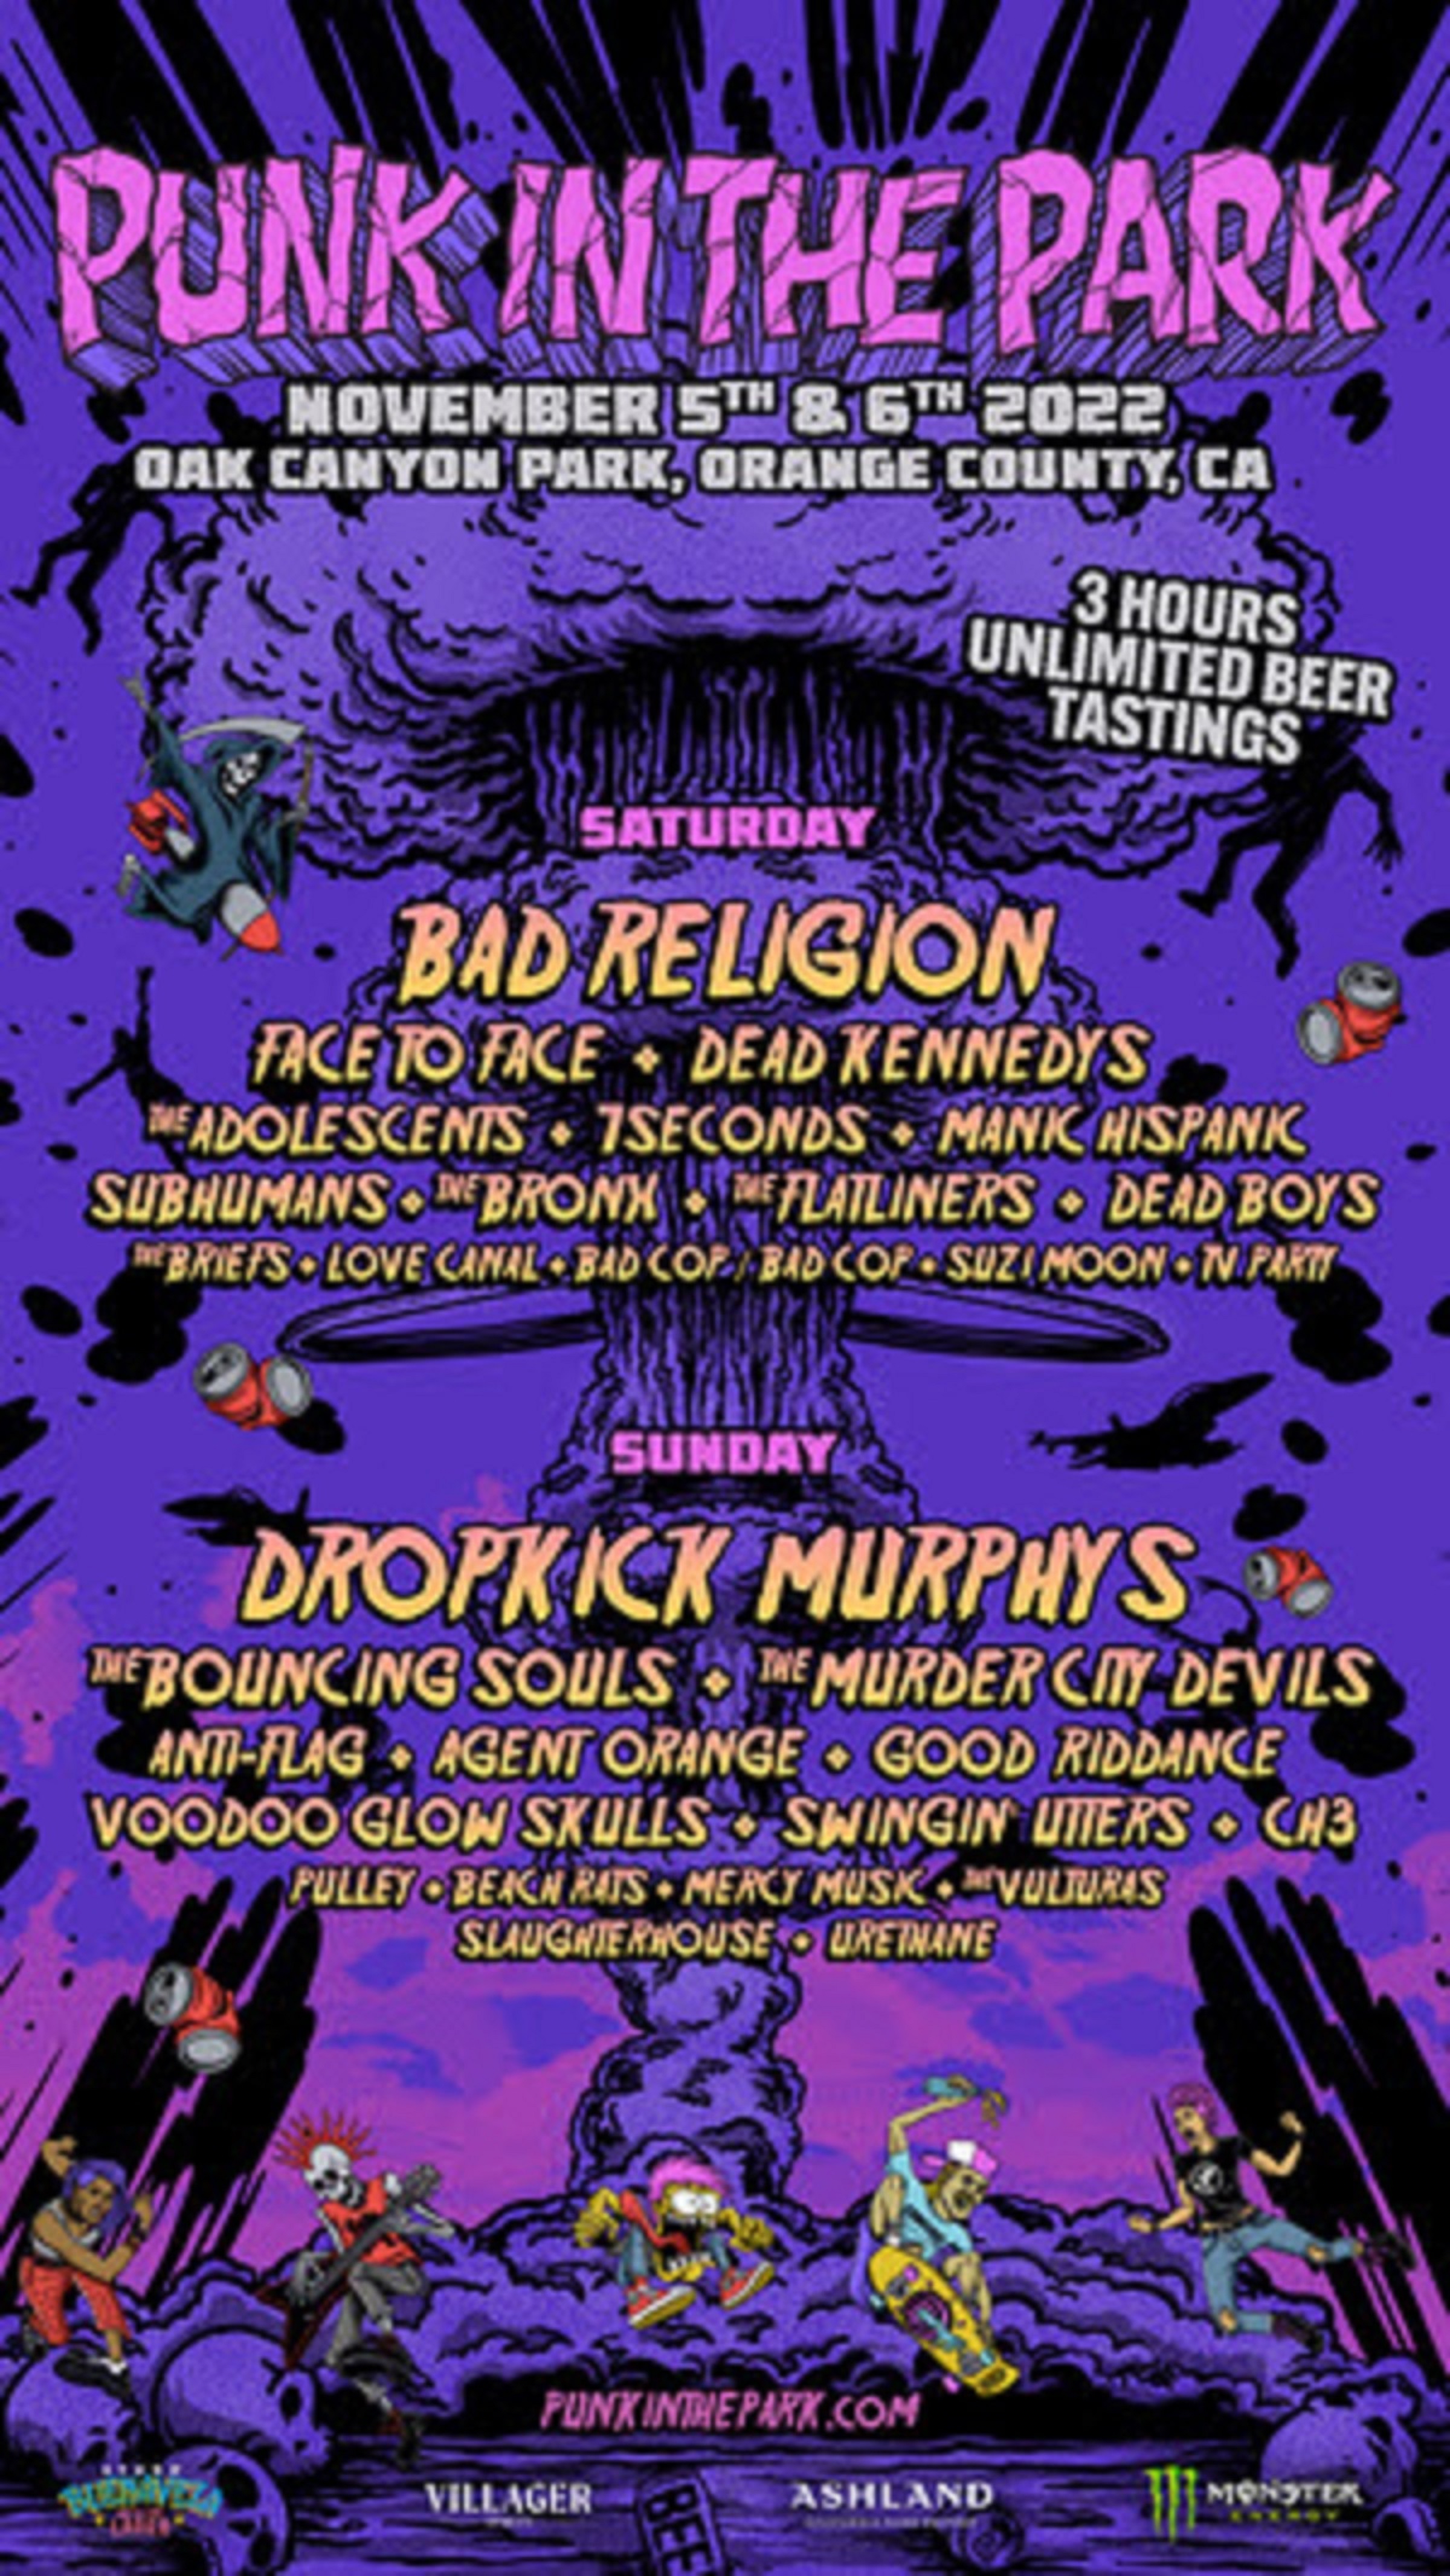 Full Daily Music Lineup Announced For Punk In The Park